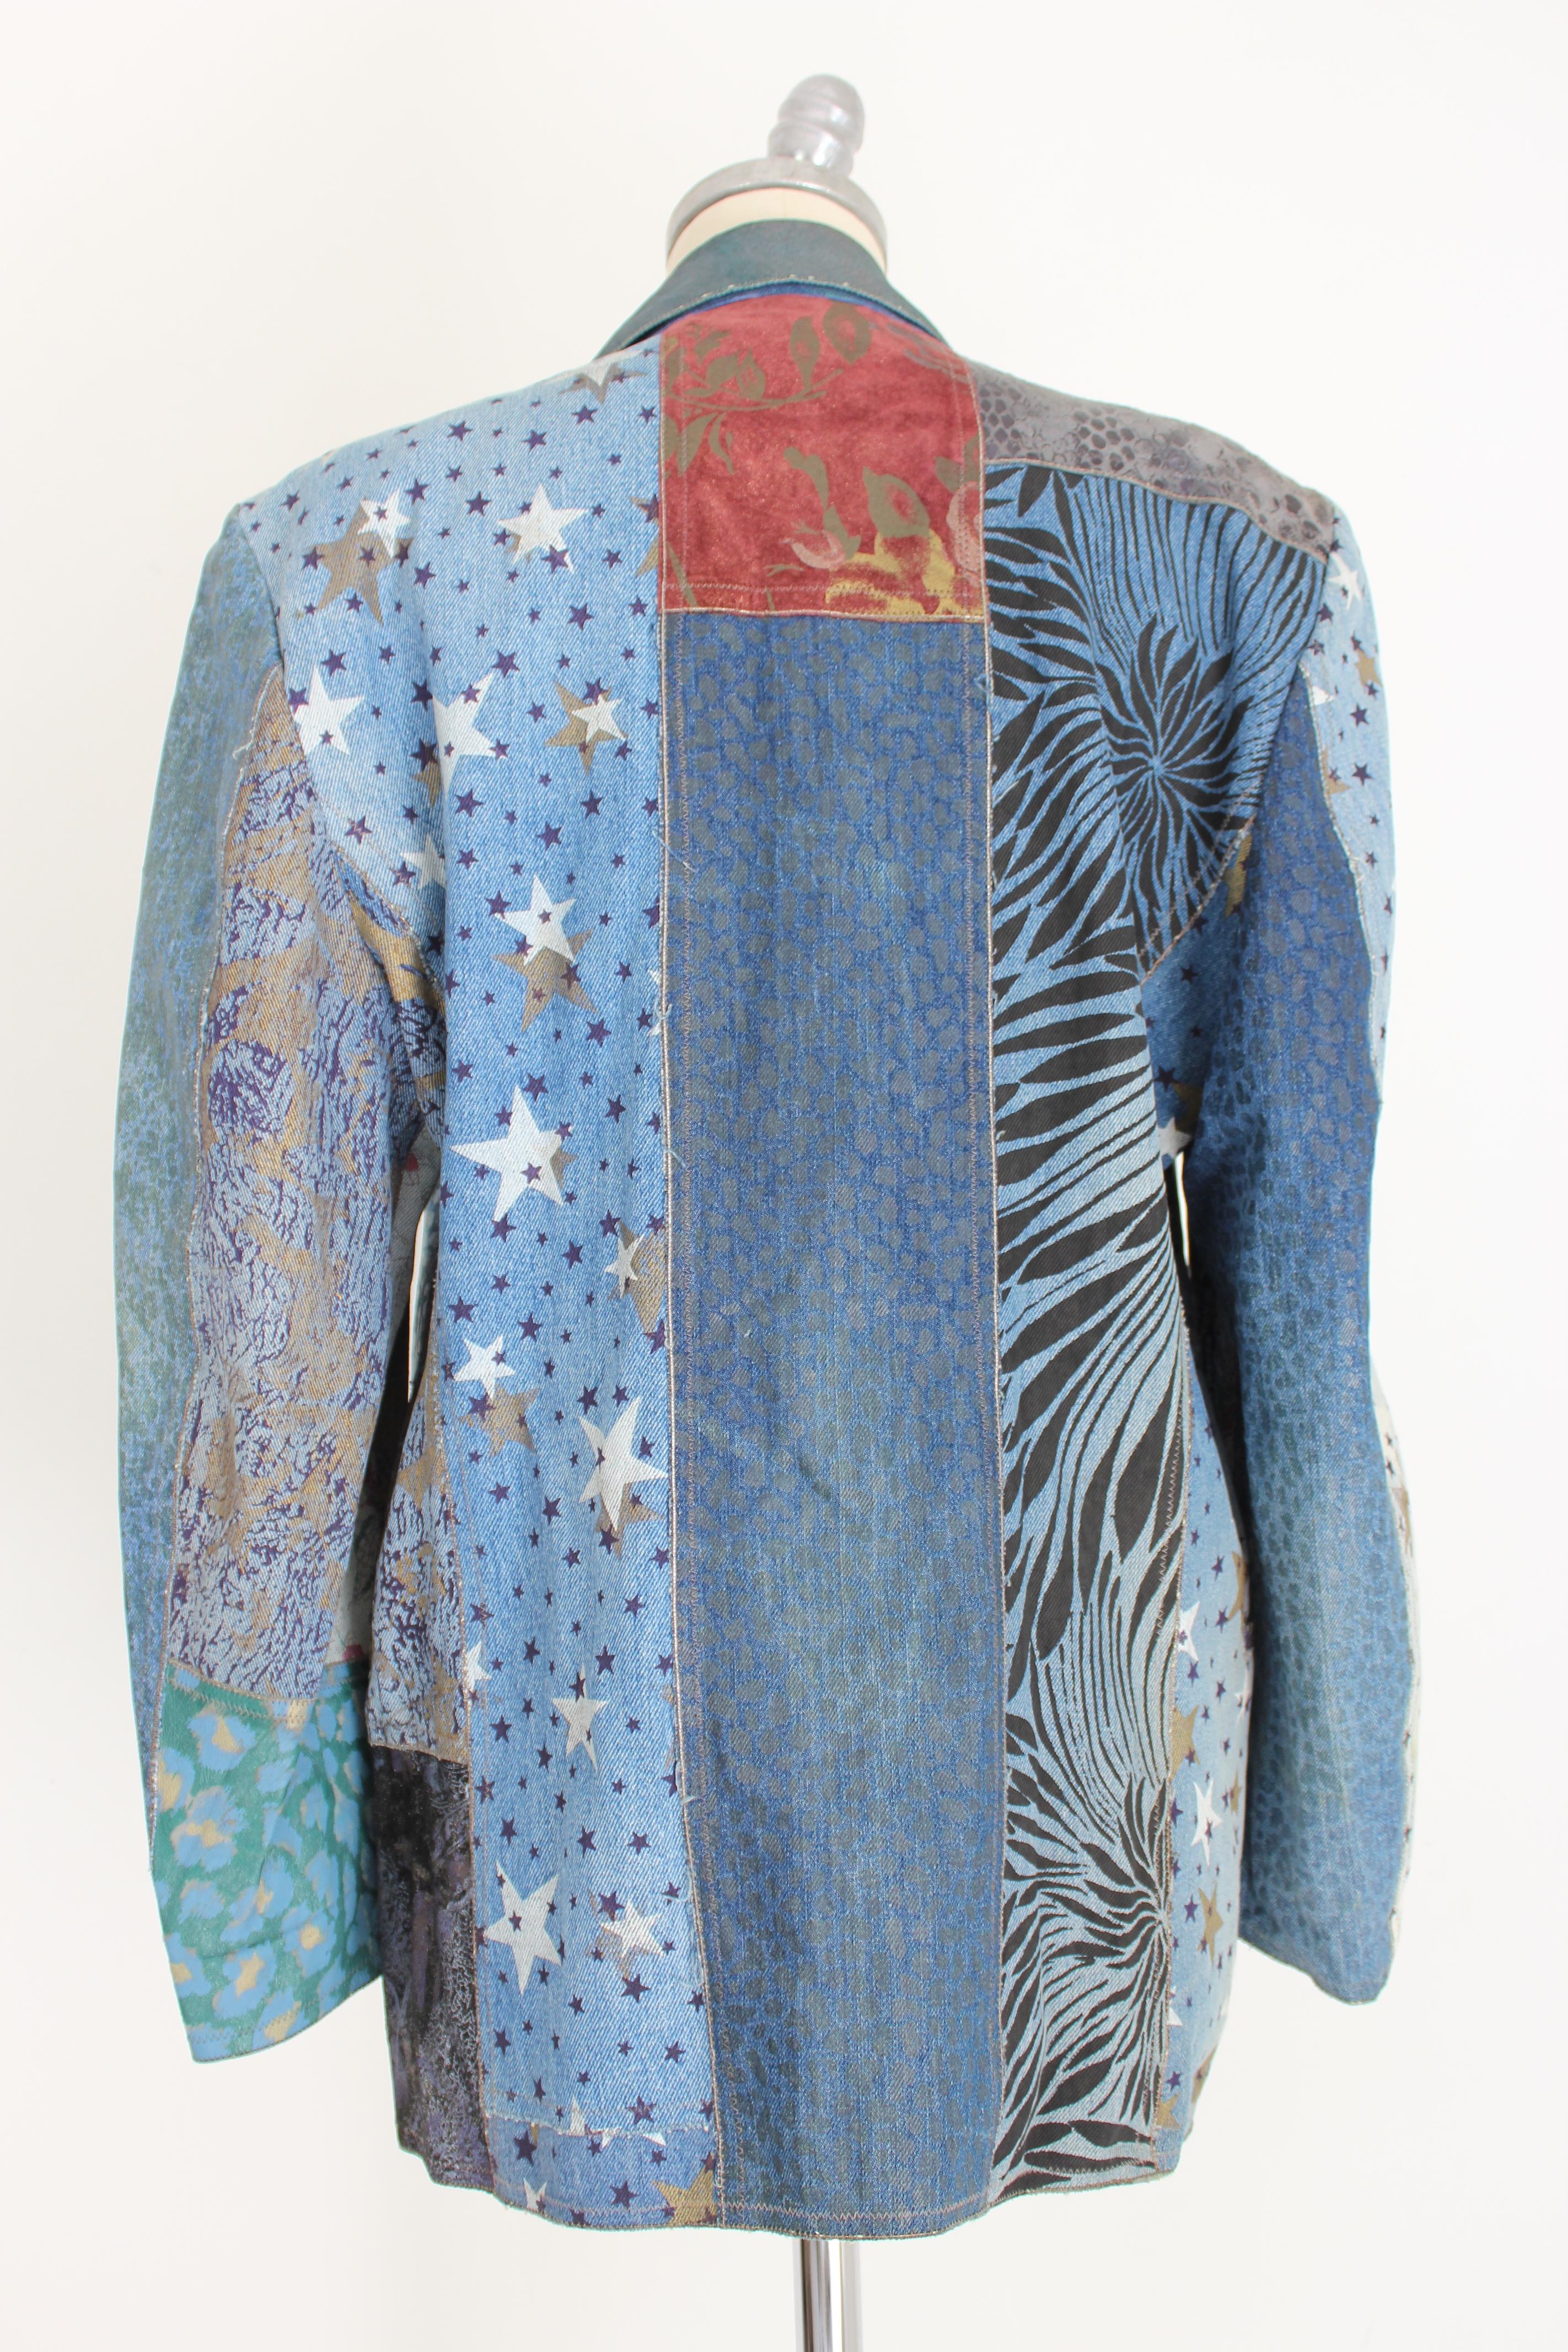 Roberto Cavalli vintage 80s women's jacket. Long model jacket, light blue with gold-colored spotted print and white stars. Clip button closure. Two pockets on the hips. 80% jeans 20% leather. Internal shoulder straps. Made in Italy. Excellent